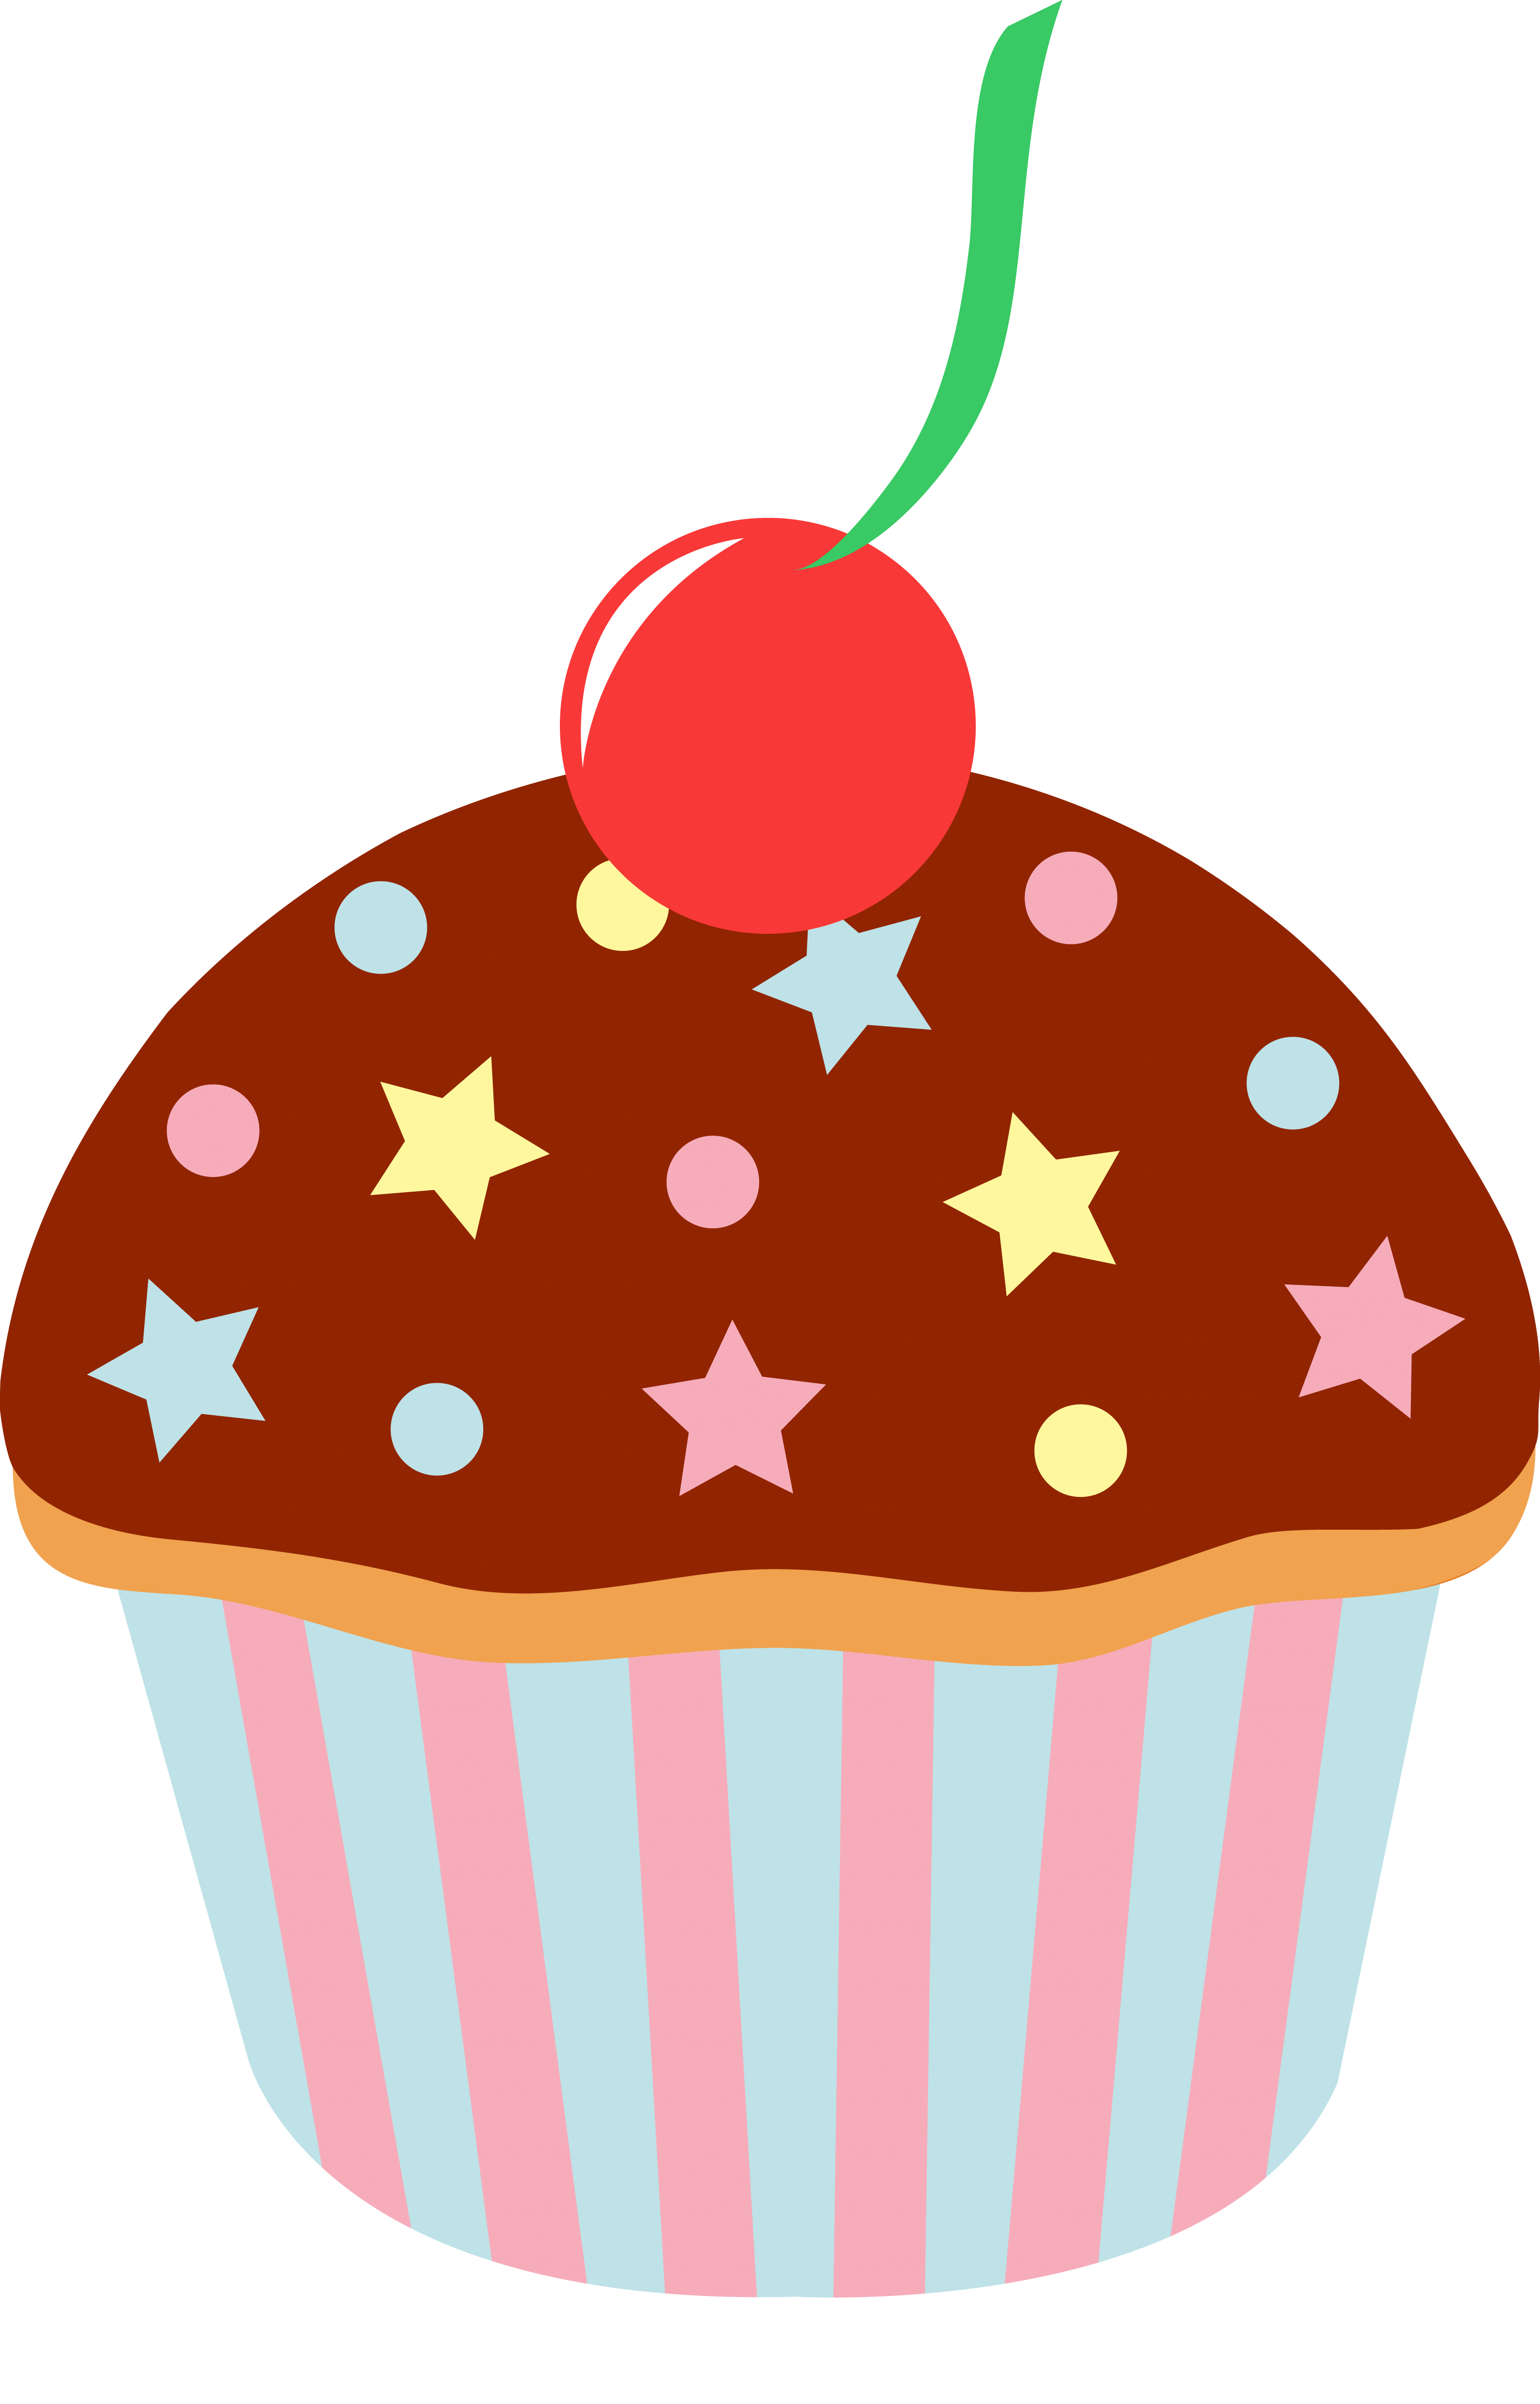 Muffin clipart yellow cupcake. Choclate free collection download